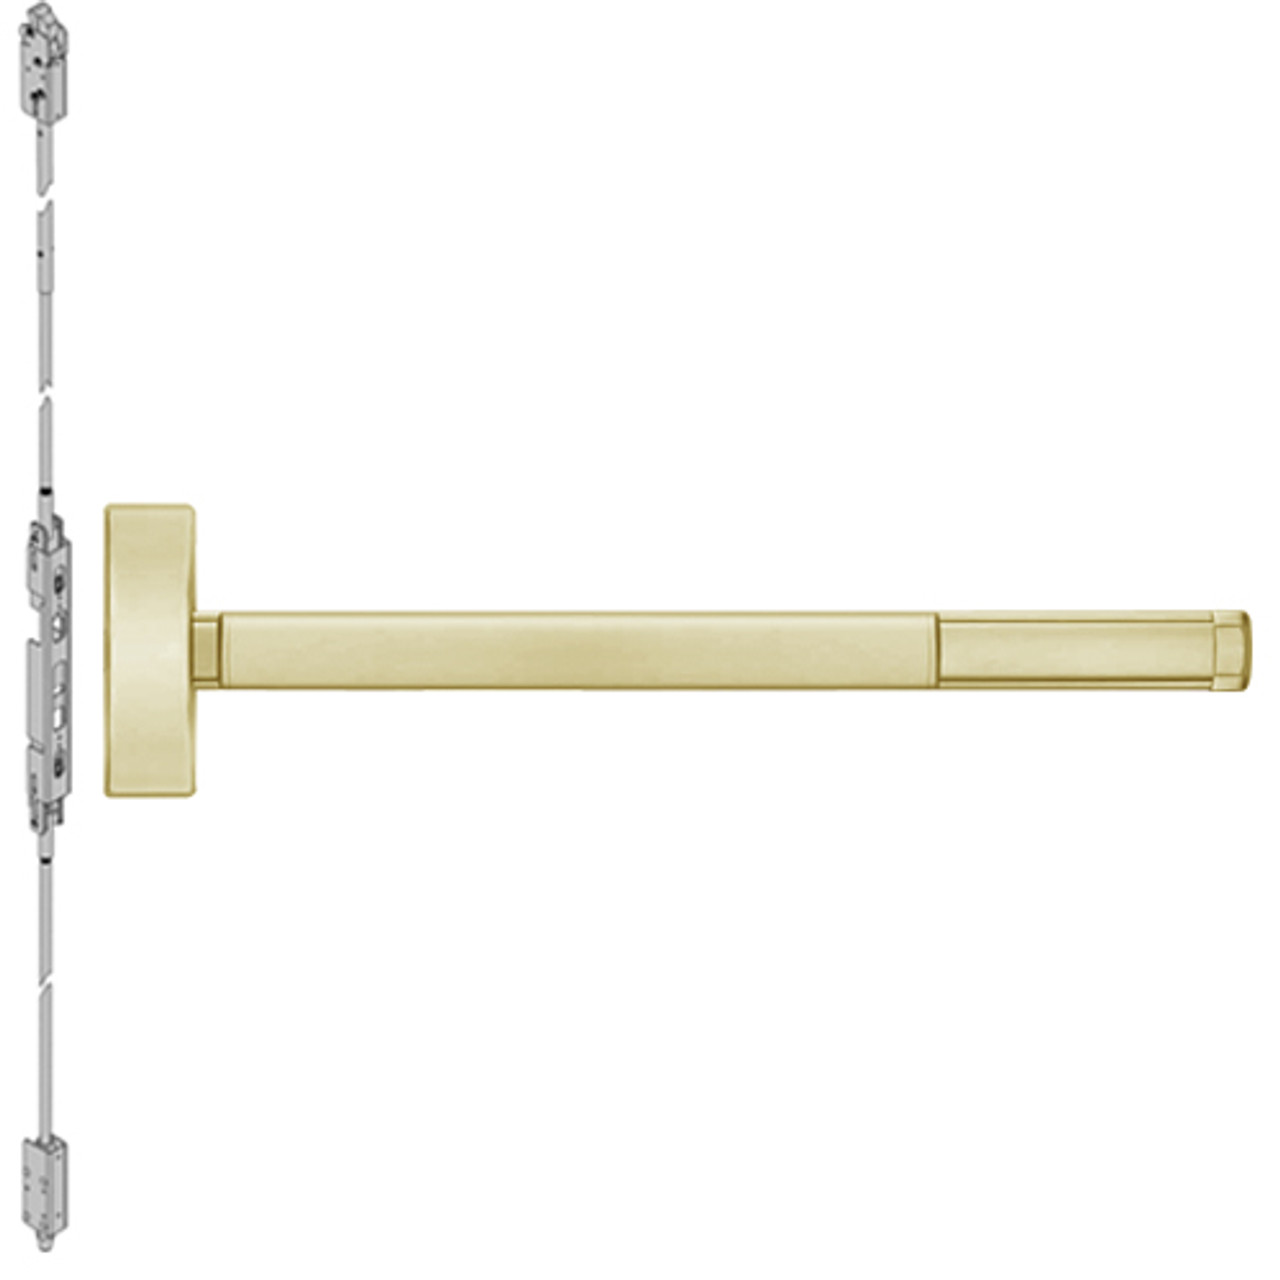 TS2814-606-48 PHI 2800 Series Concealed Vertical Rod Exit Device with Touchbar Monitoring Switch Prepped for Lever-Knob Always Active in Satin Brass Finish